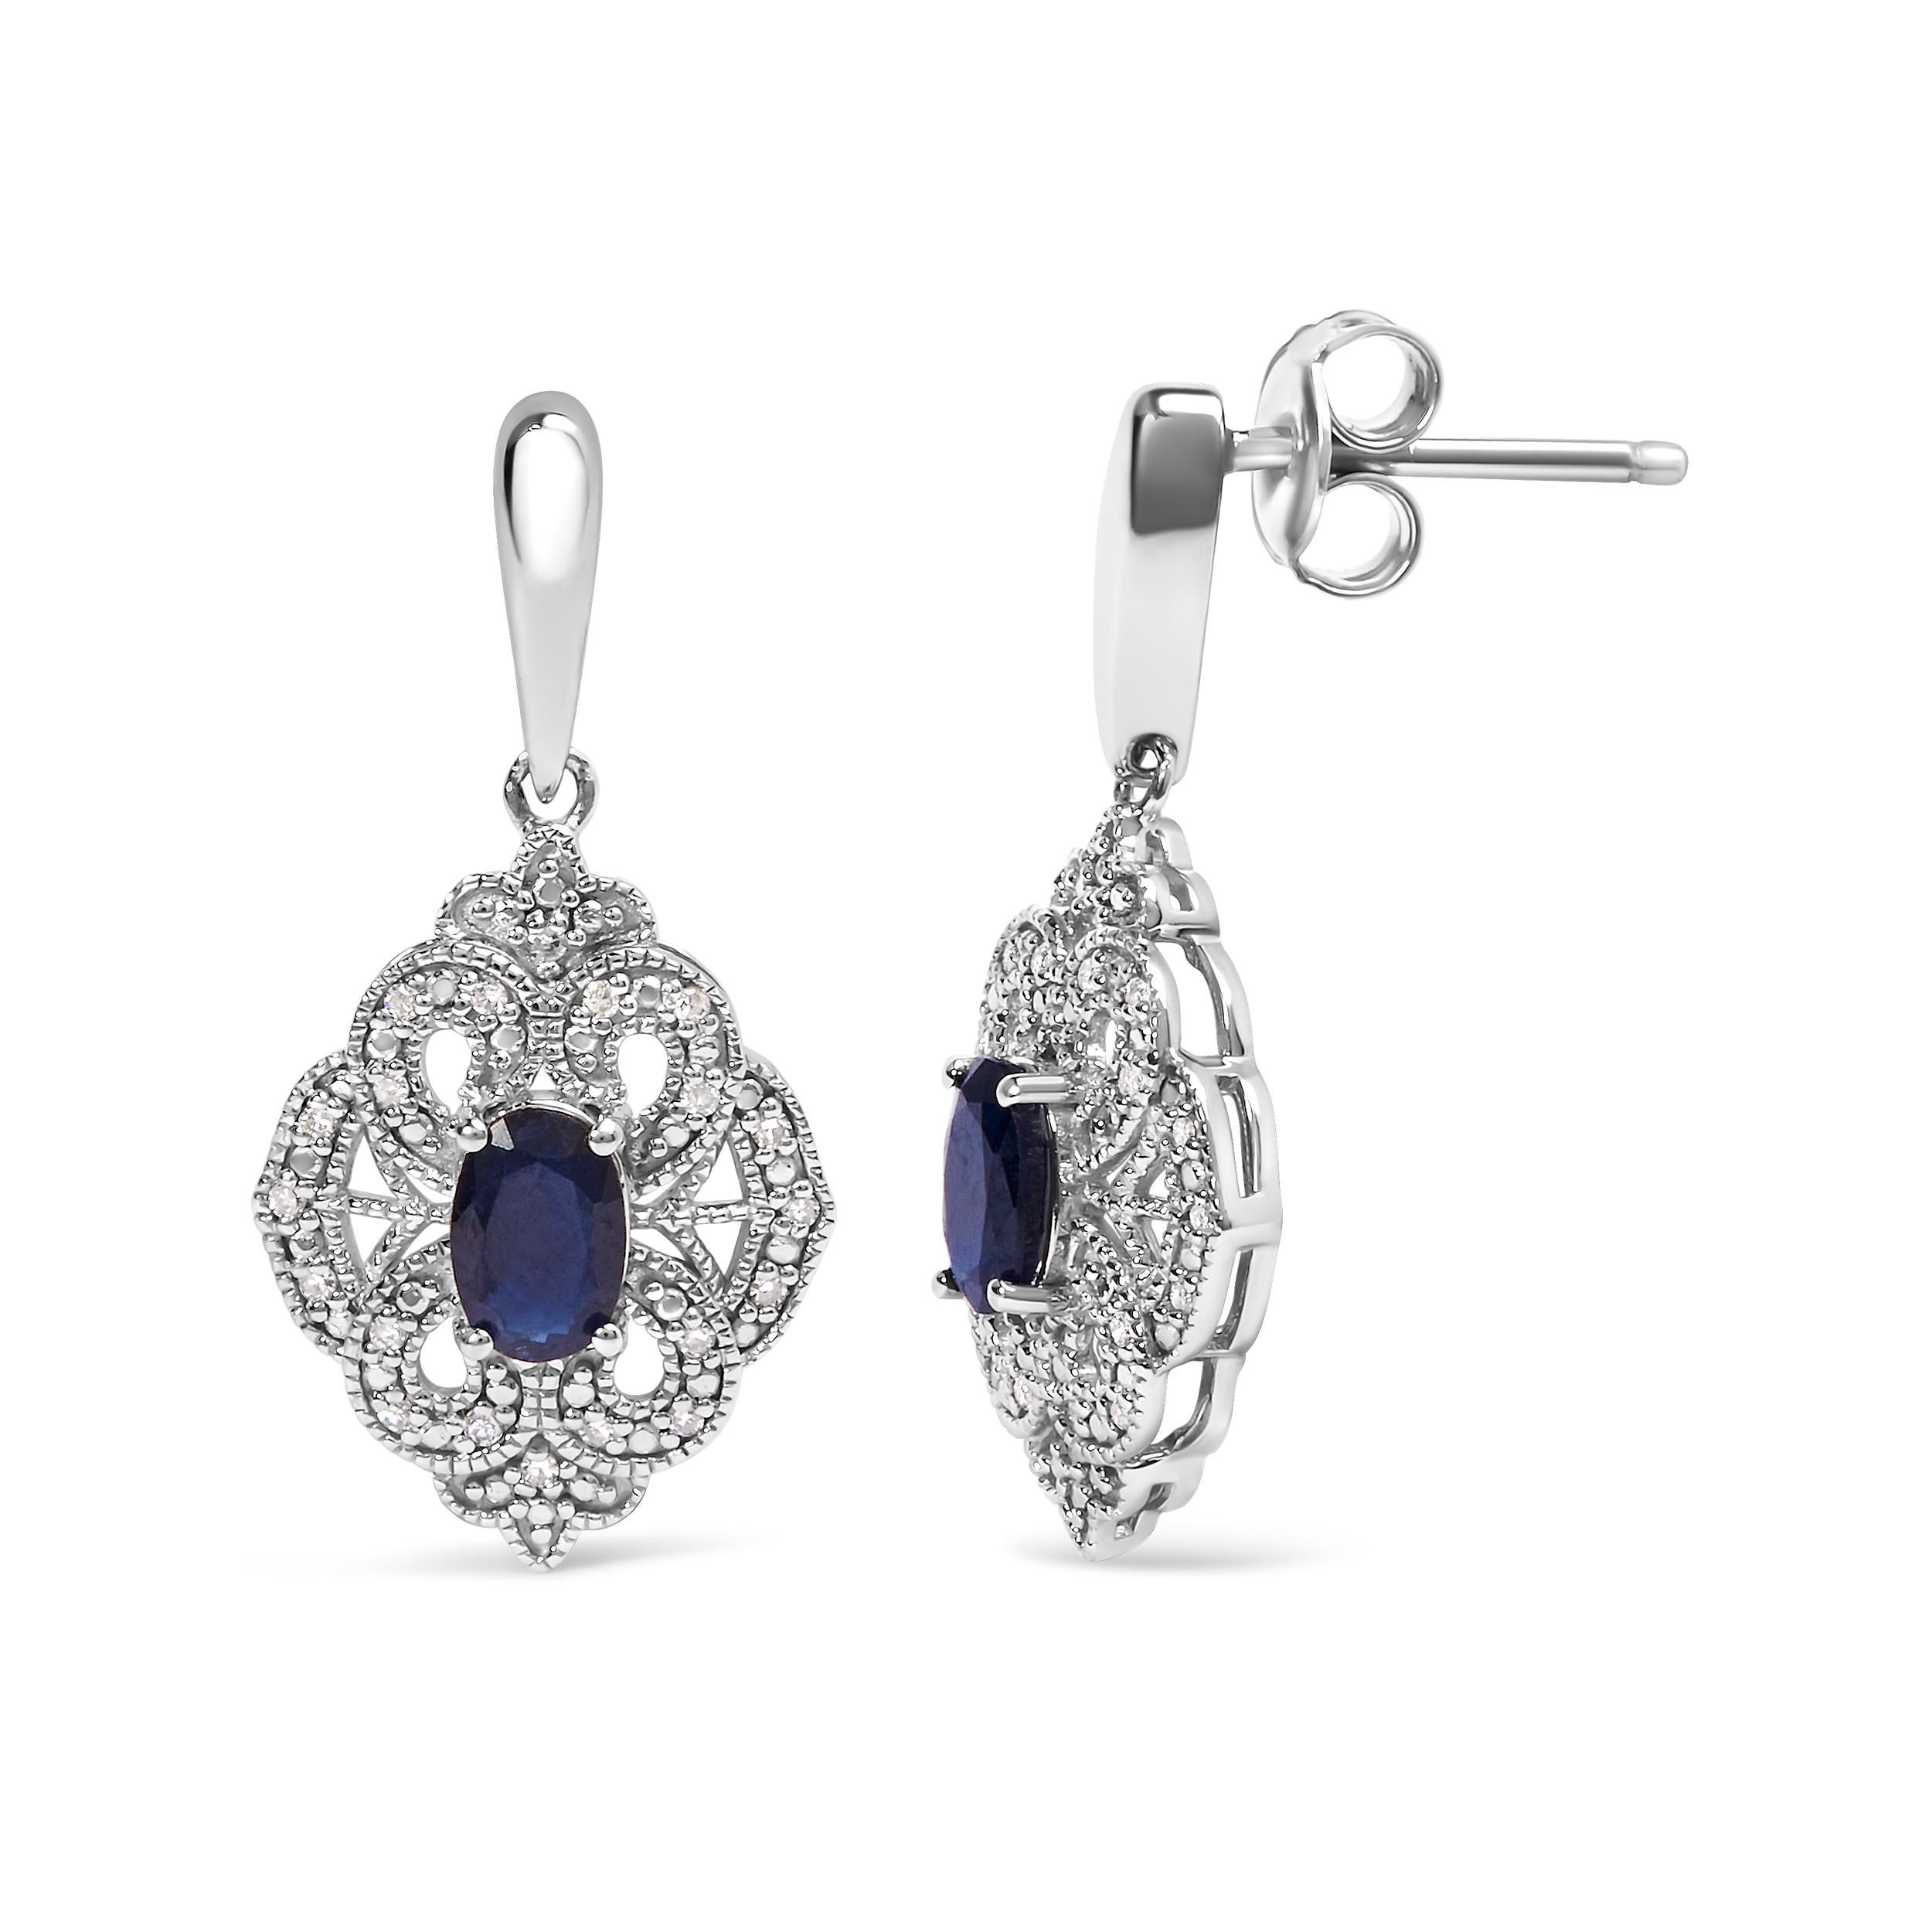 Embark on a journey of timeless elegance with these exquisite Art Deco-inspired shield dangle earrings. Crafted from the finest .925 sterling silver, they showcase the harmonious interplay of natural diamonds and lab-created blue sapphires. The